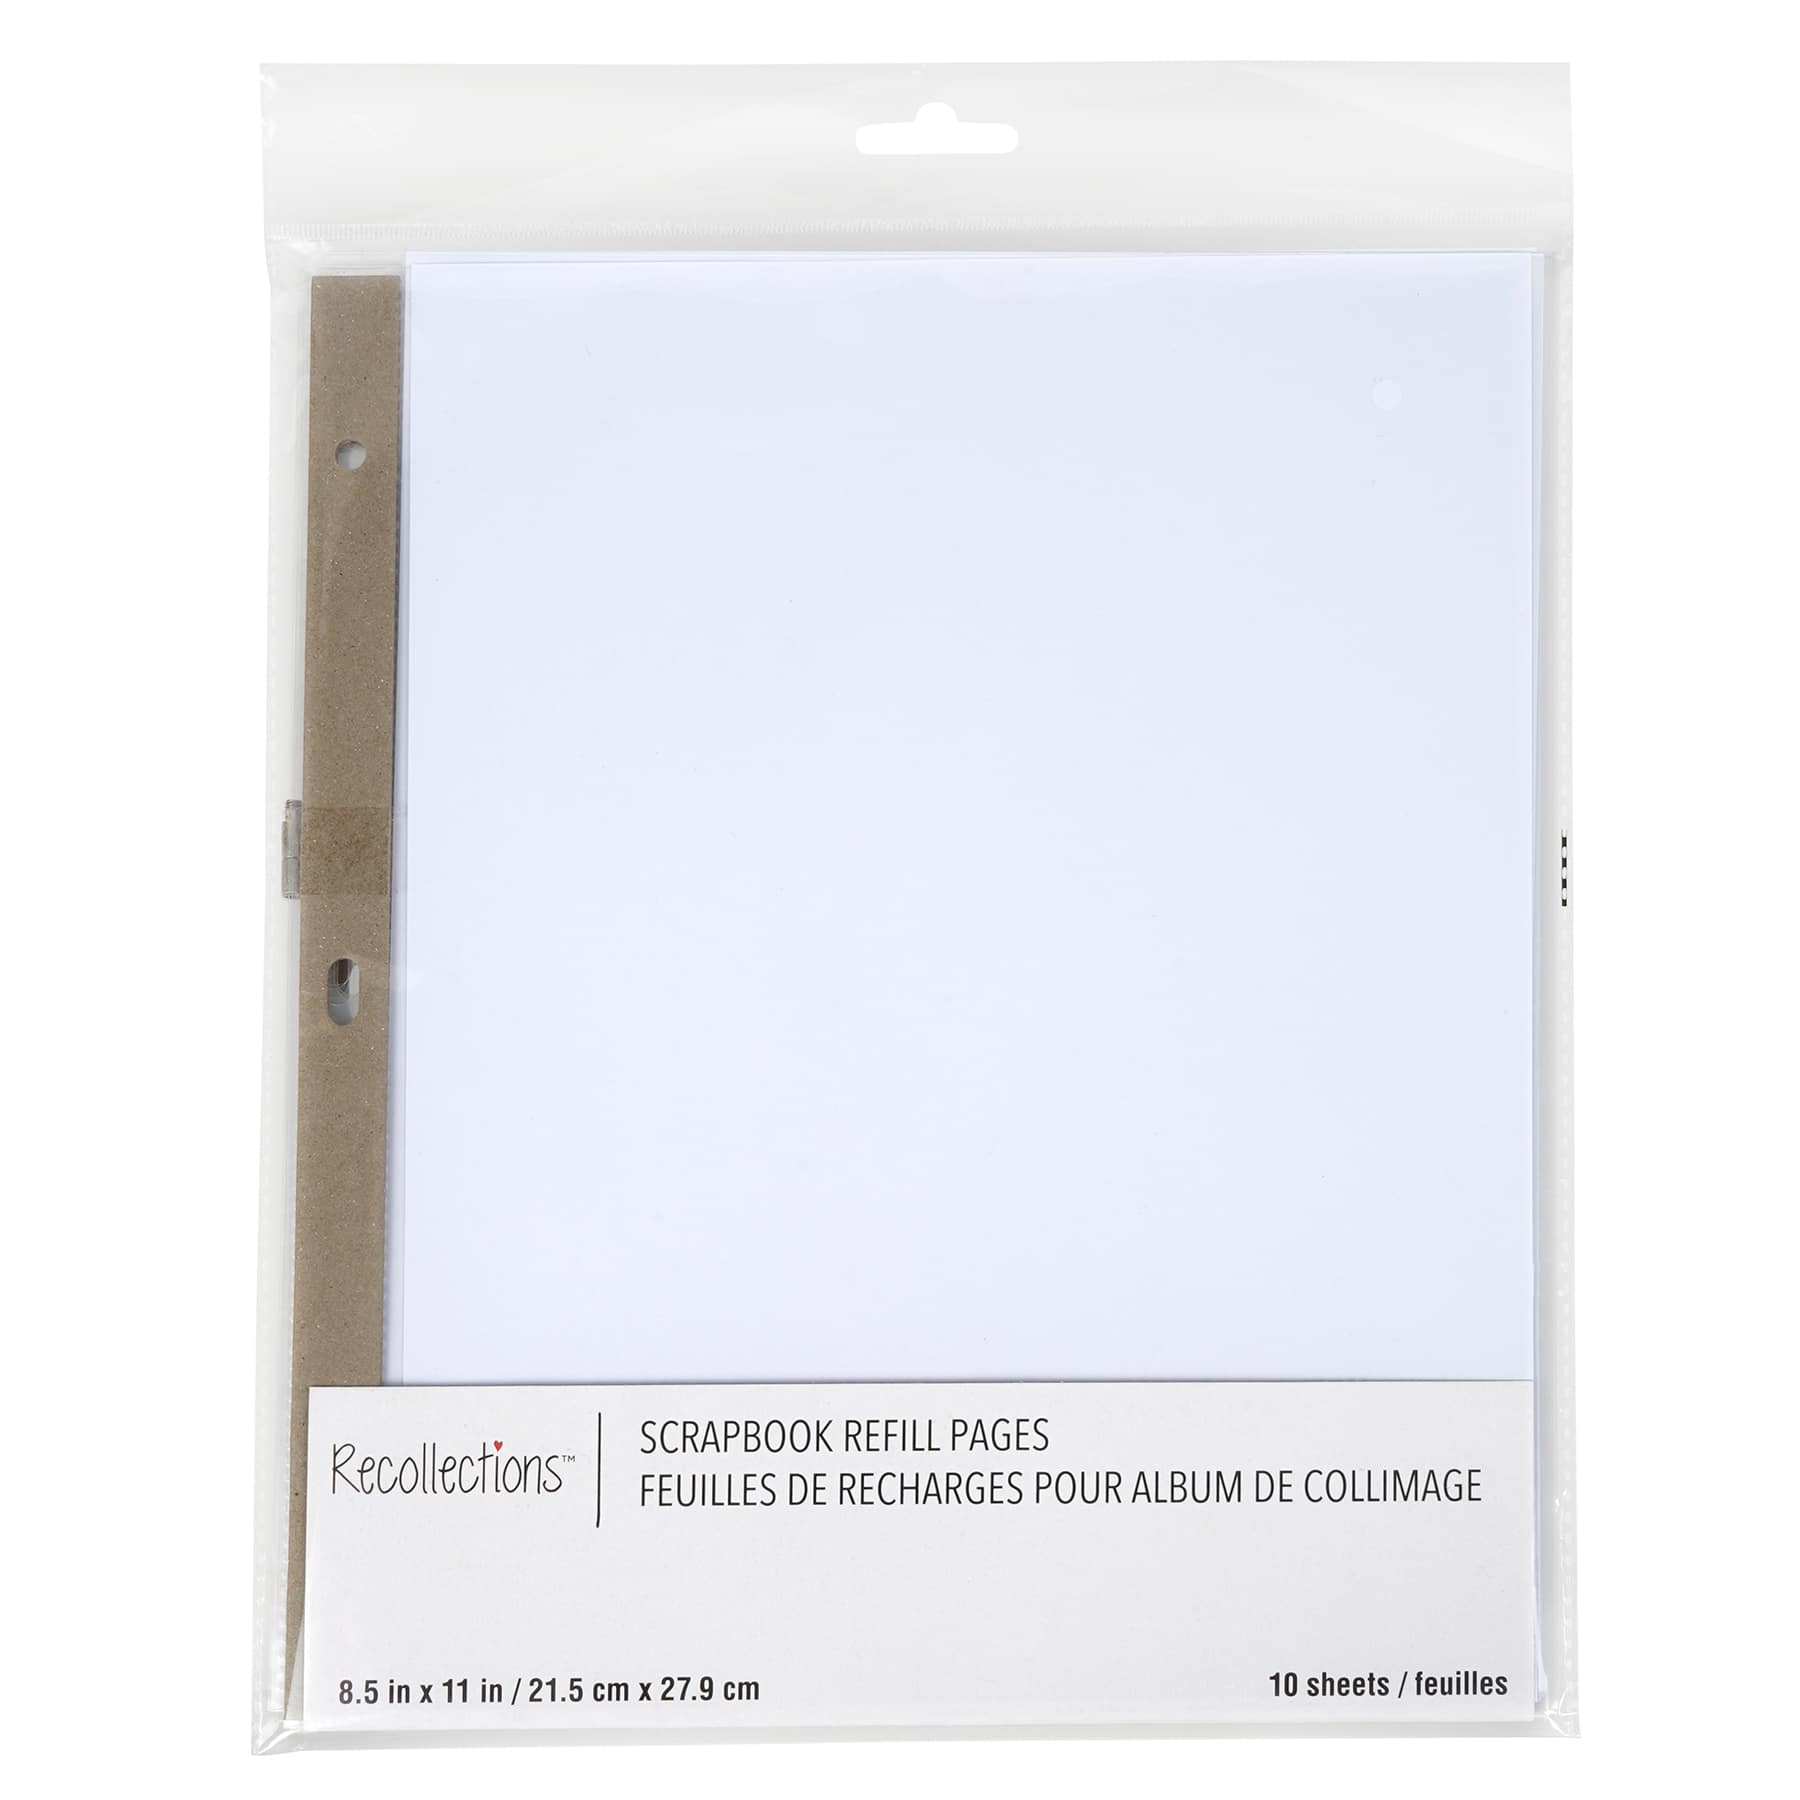 11 x 8.5 White Scrapbook Refill Pages by Recollections™